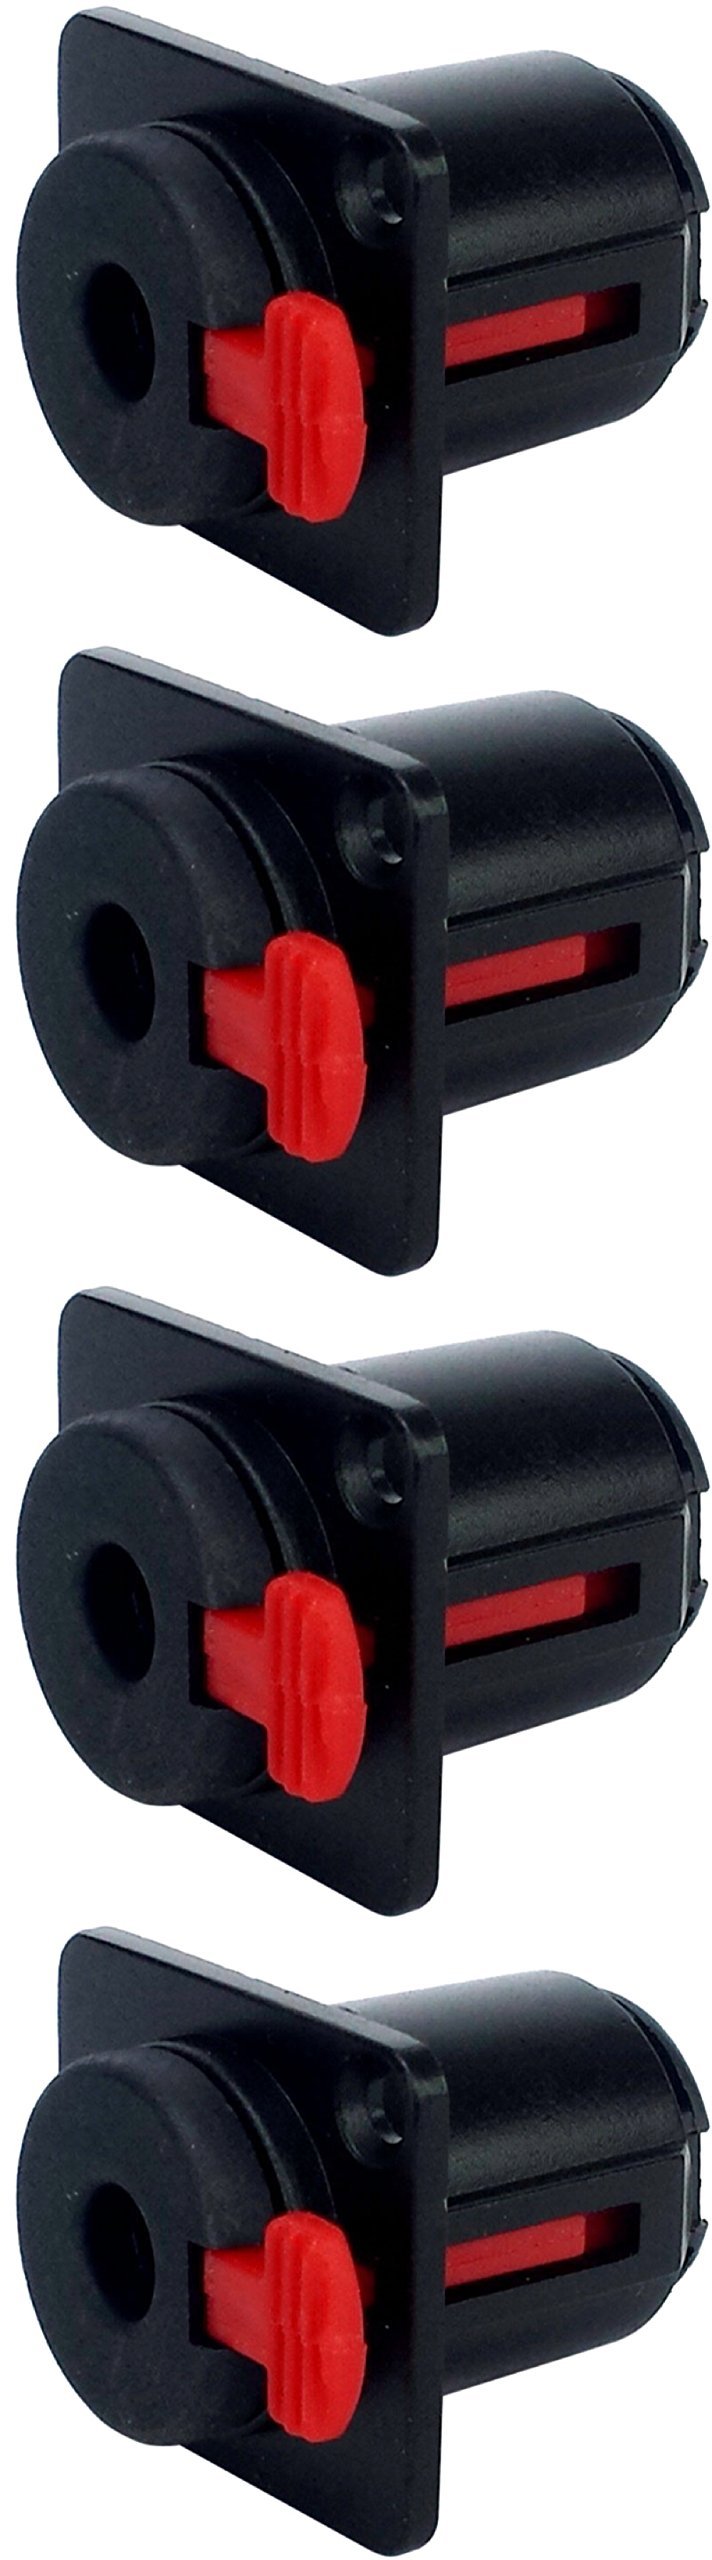 [AUSTRALIA] - CESS 1/4" Jacks TS and TRS Panel Mount Jack Locking Style D Series Size - 1/4 Inch Female Stereo and Mono/TRS and TS Audio Socket - 6.35mm Stereo and Mono Socket (4 Pack) 